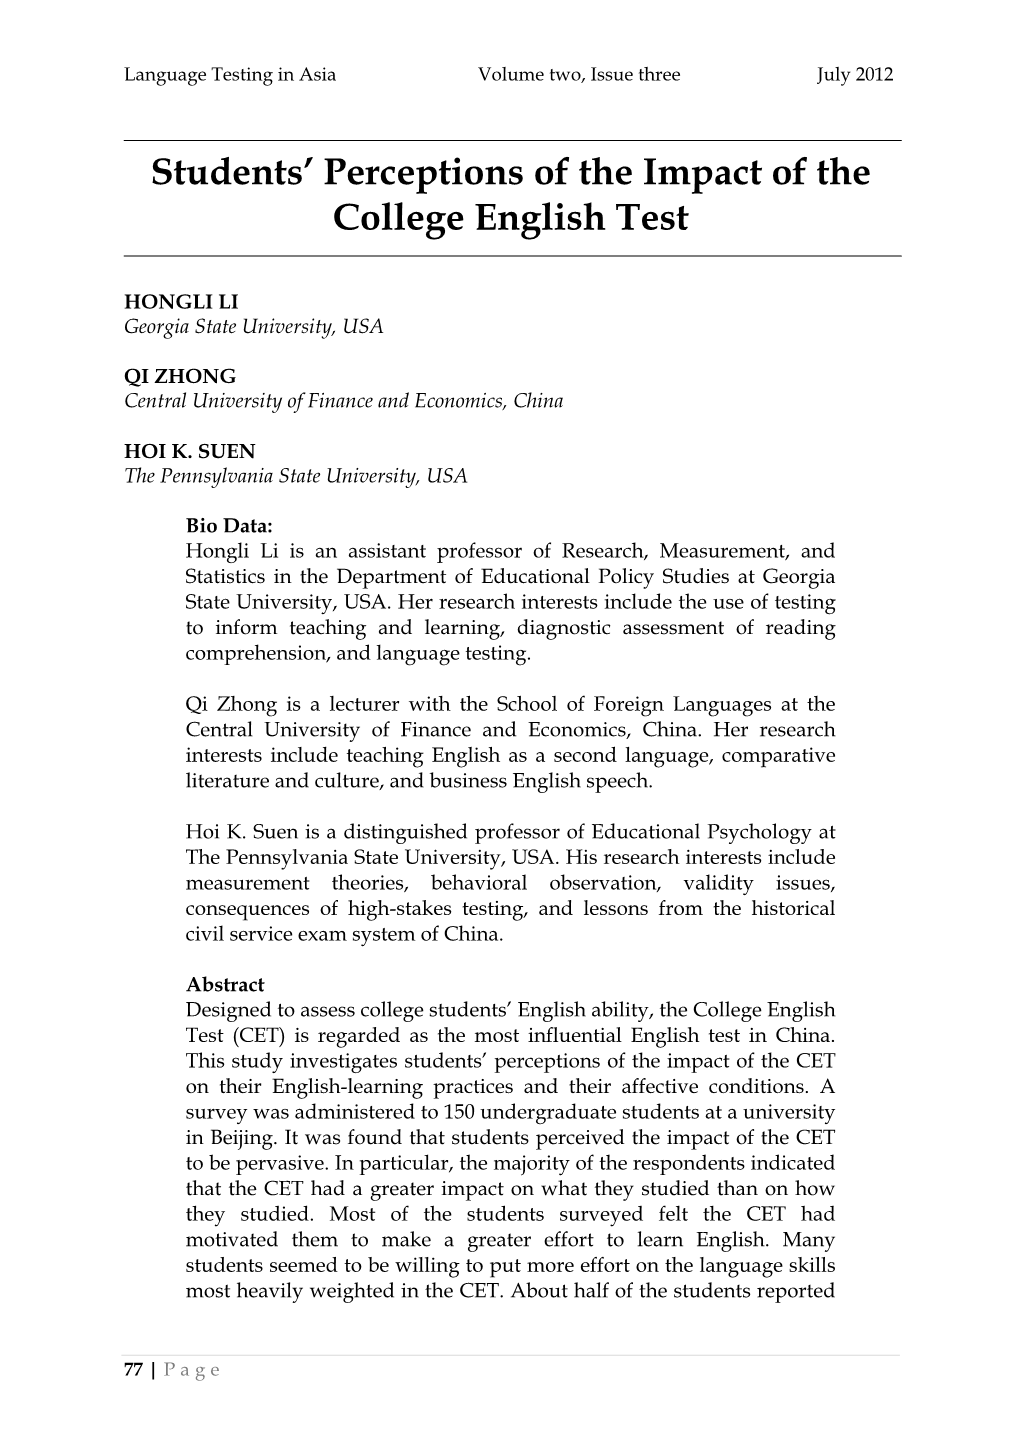 Students' Perceptions of the Impact of the College English Test